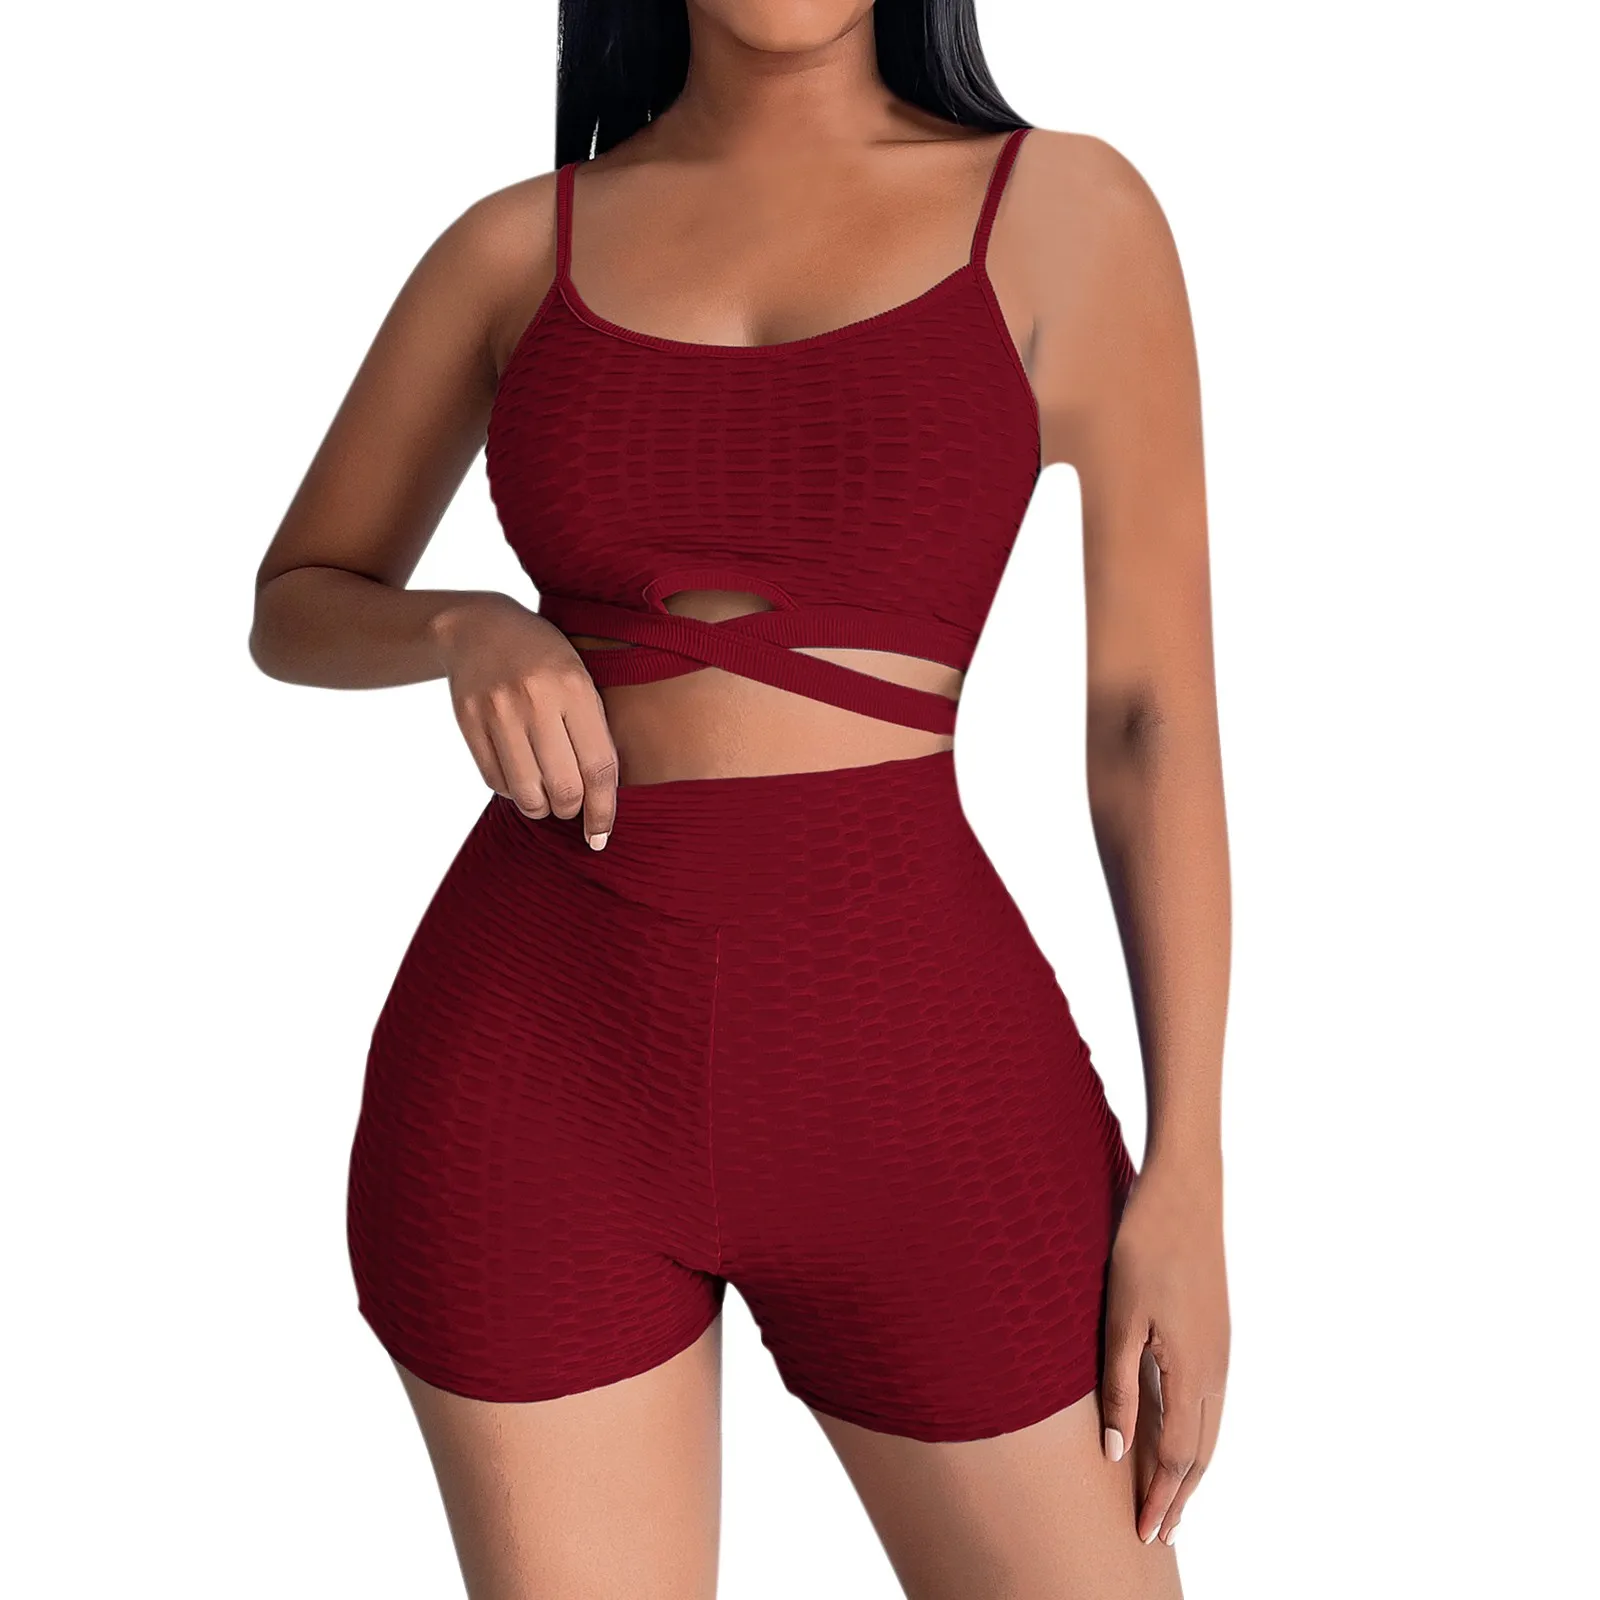 

Womens 2 Piece Workout Sets Seamless Criss Cross Strappy Ribbed Crop Top High Waisted Shorts Outfits Tracksuit Gym Clothing Set